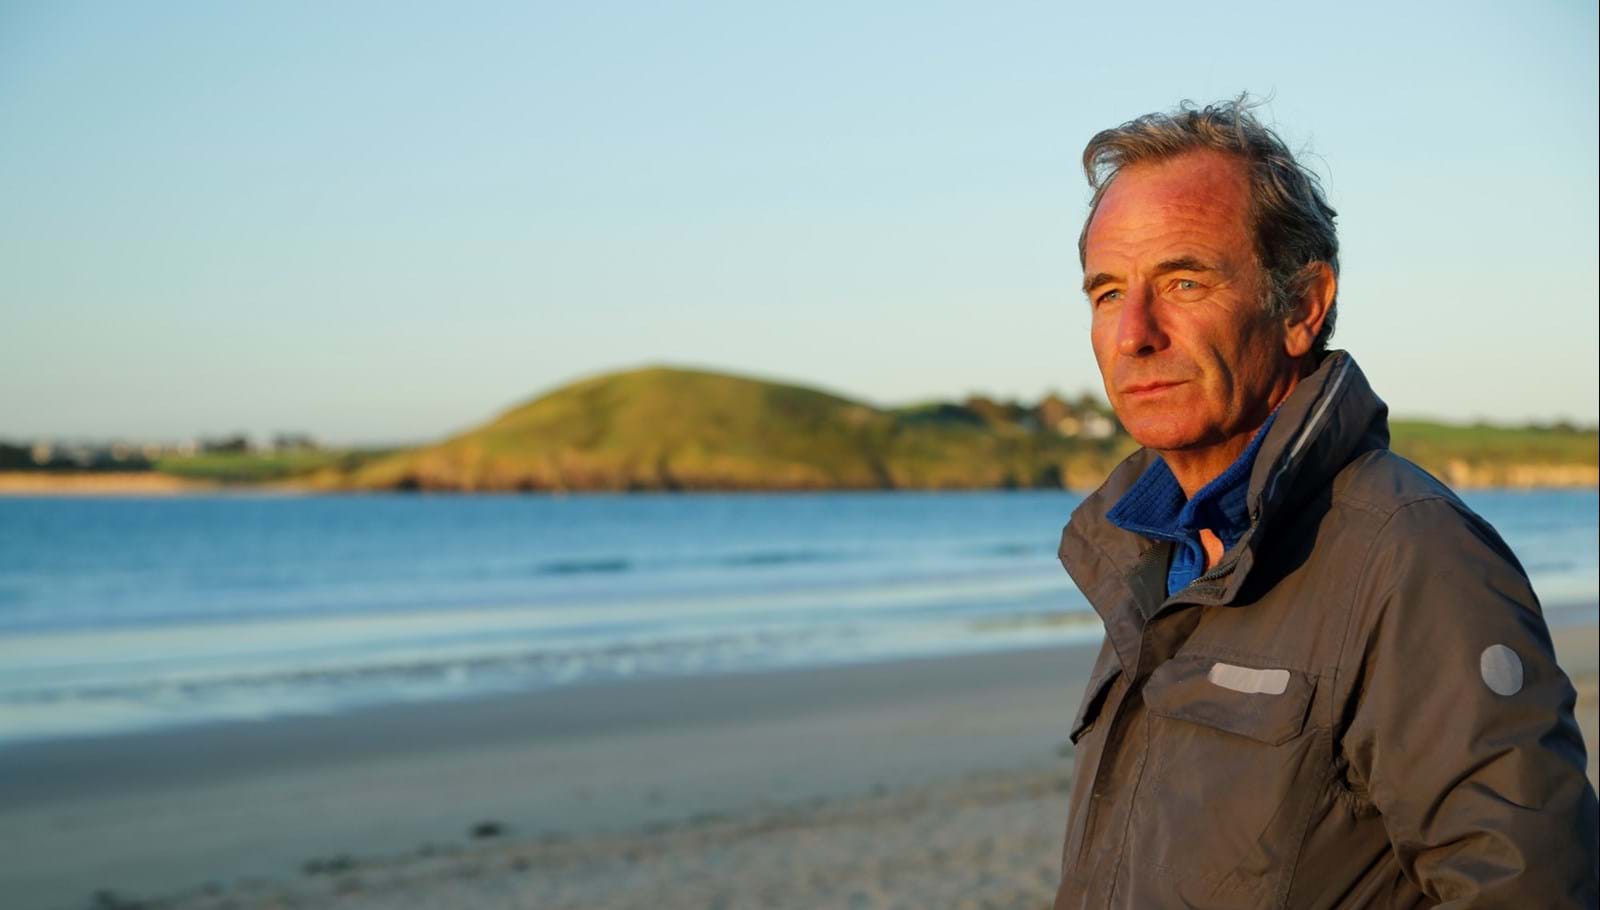 Channel 5 commissions Firecracker Films Scotland to make Robson Green: Coastal Fishing